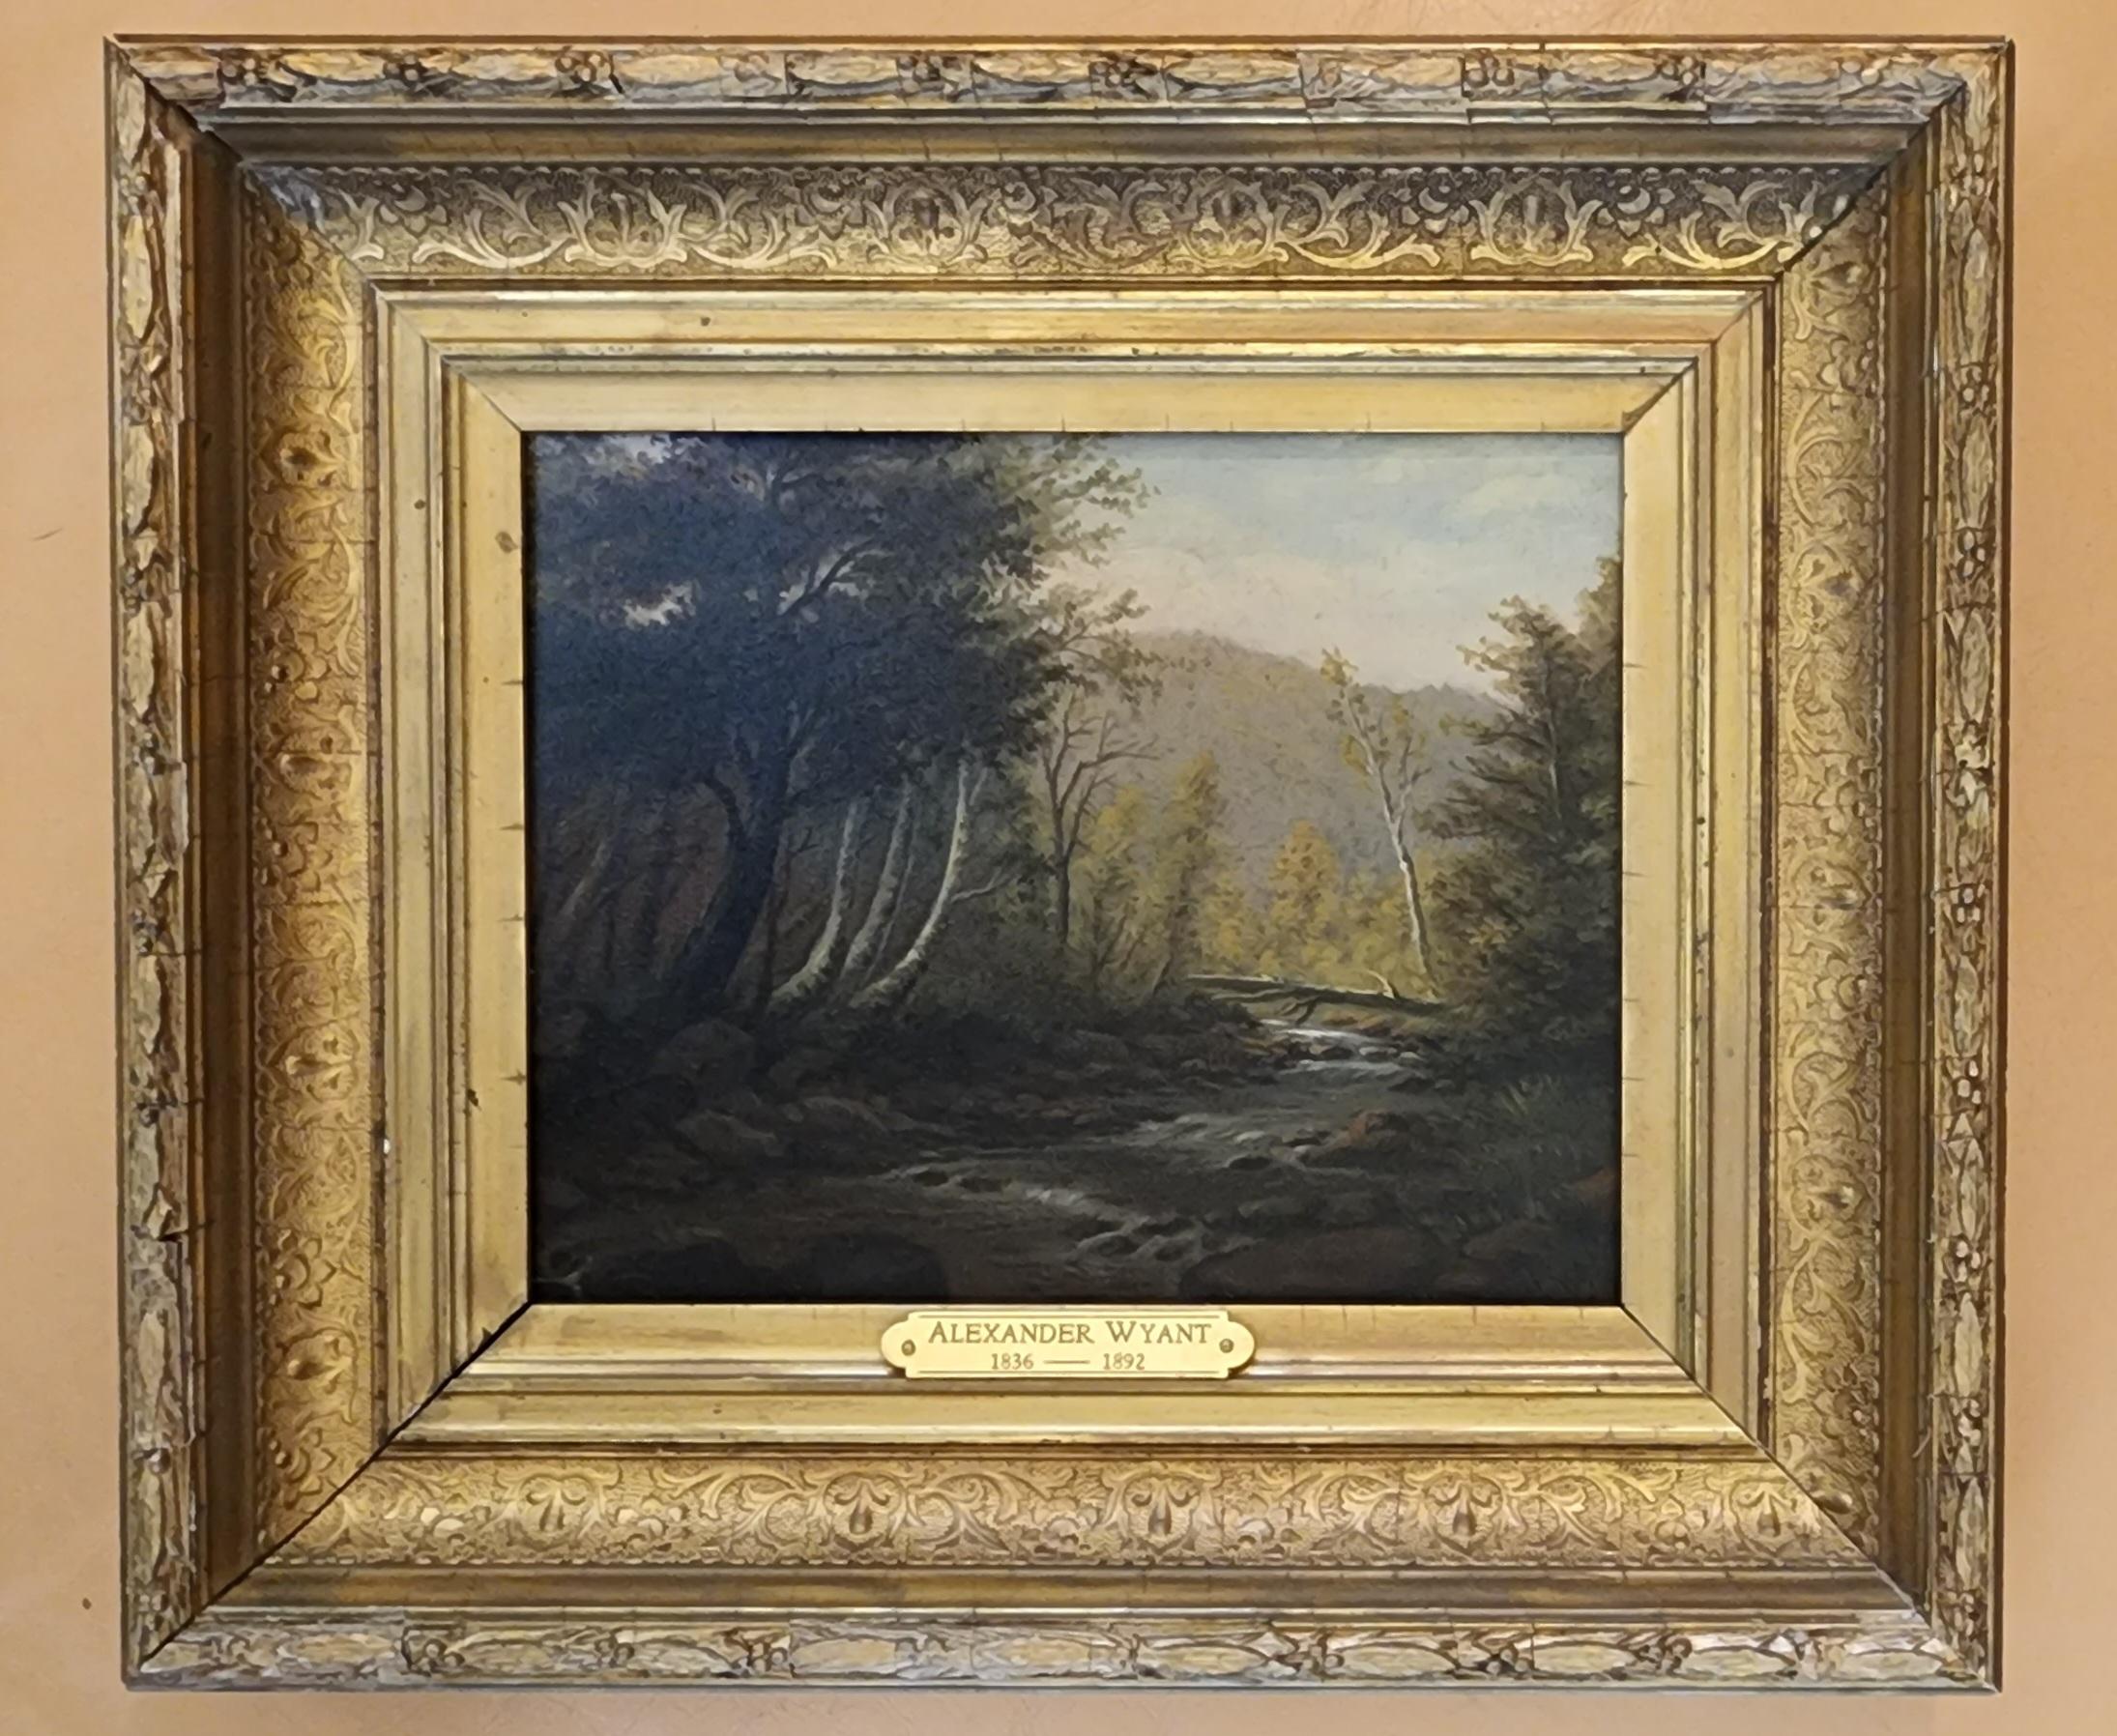 Stream through the Landscape - Painting by Alexander Wyant